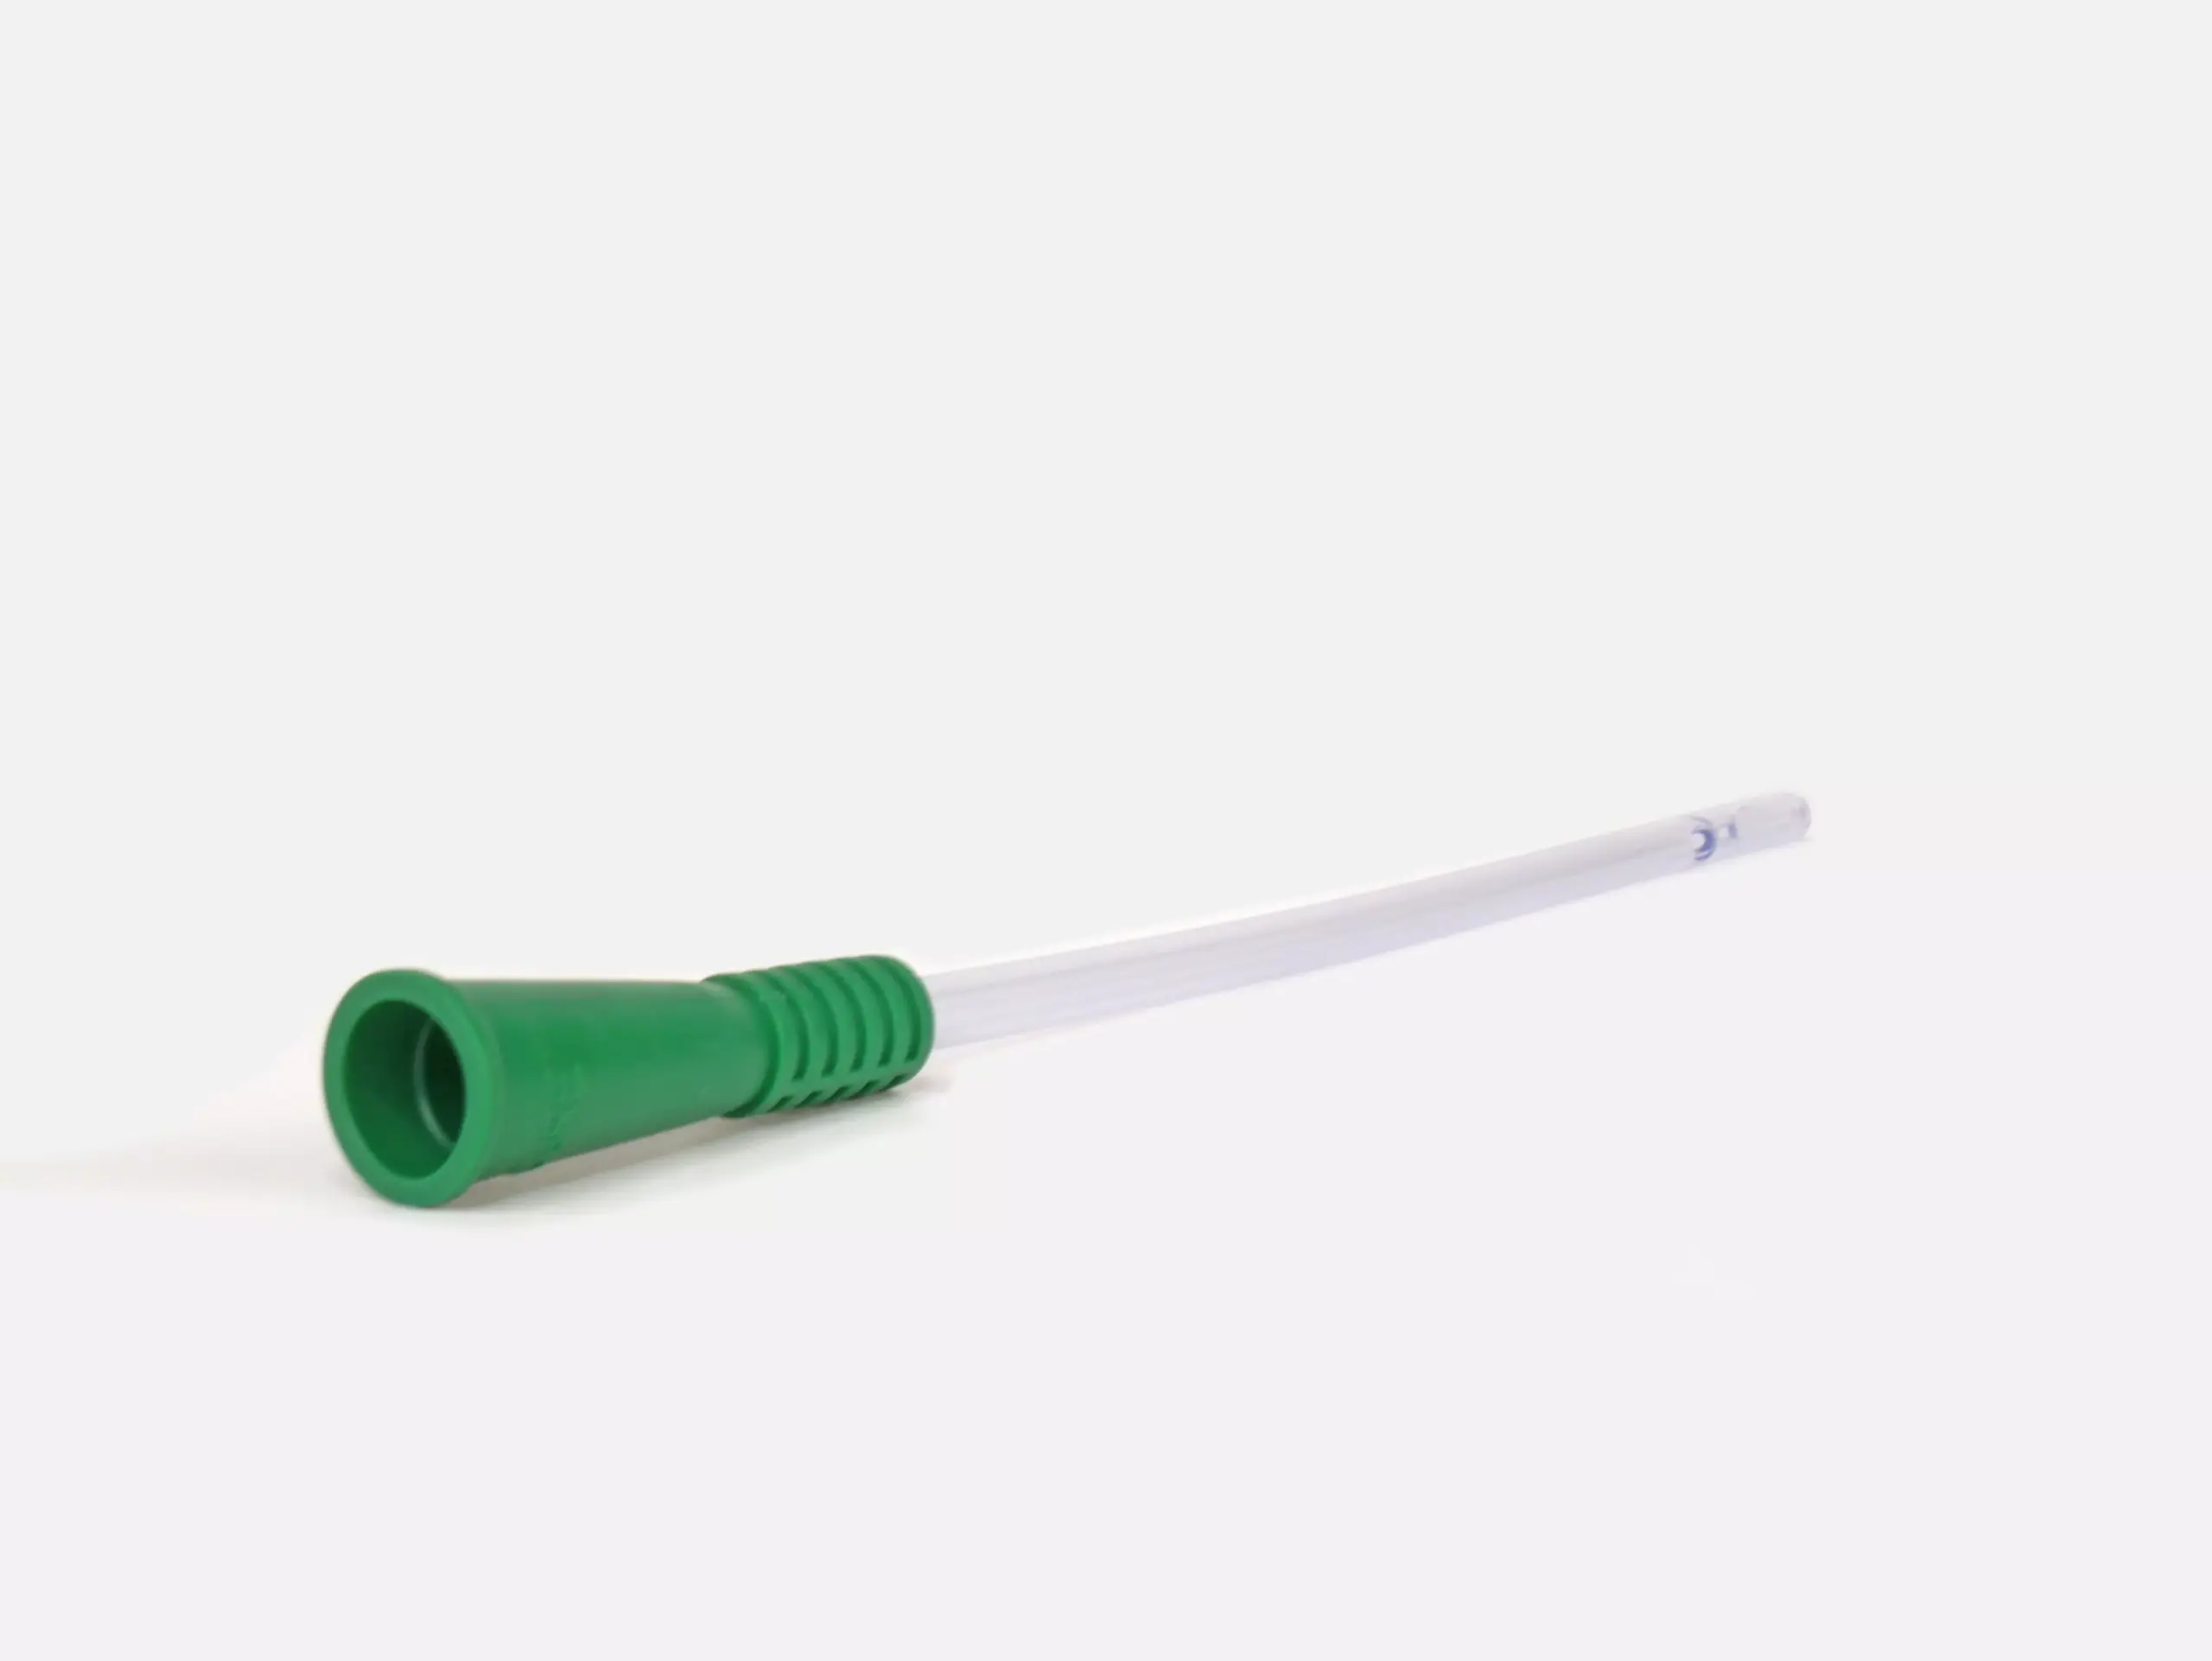 A detailed product photograph showcasing a RA Fischer Co. catheter designed for urological care, specifically from the Cure brand. The primary focus of the image is the green gripper sleeve.